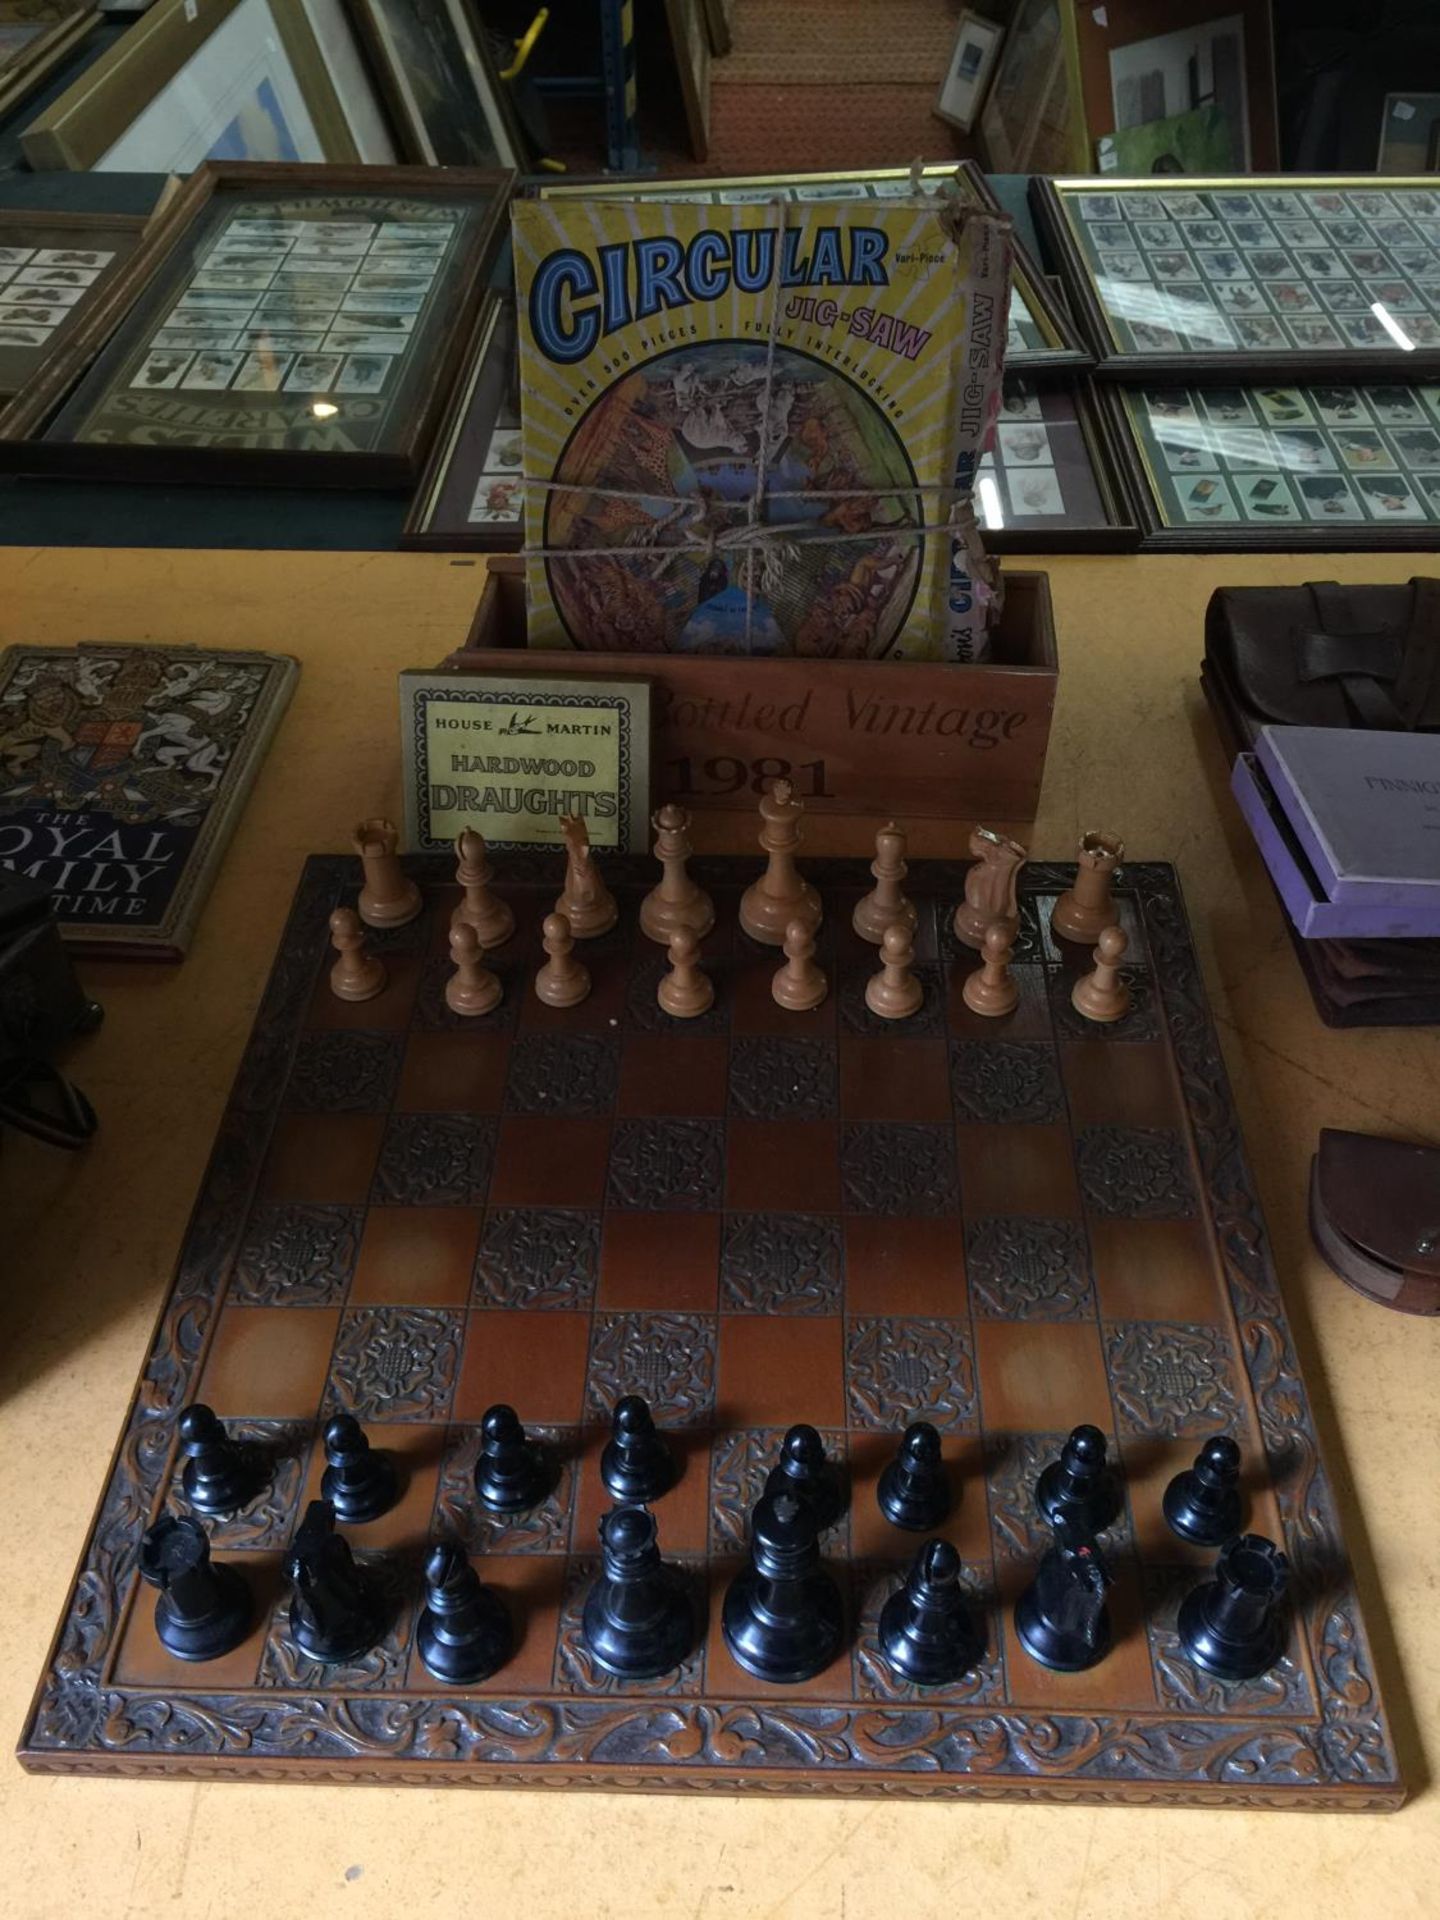 A WOODEN CARVED CHESSBOARD COMPLETE WITH THE PIECES PLUS DRAUGHTS AND A VINTAGE JIGSAW